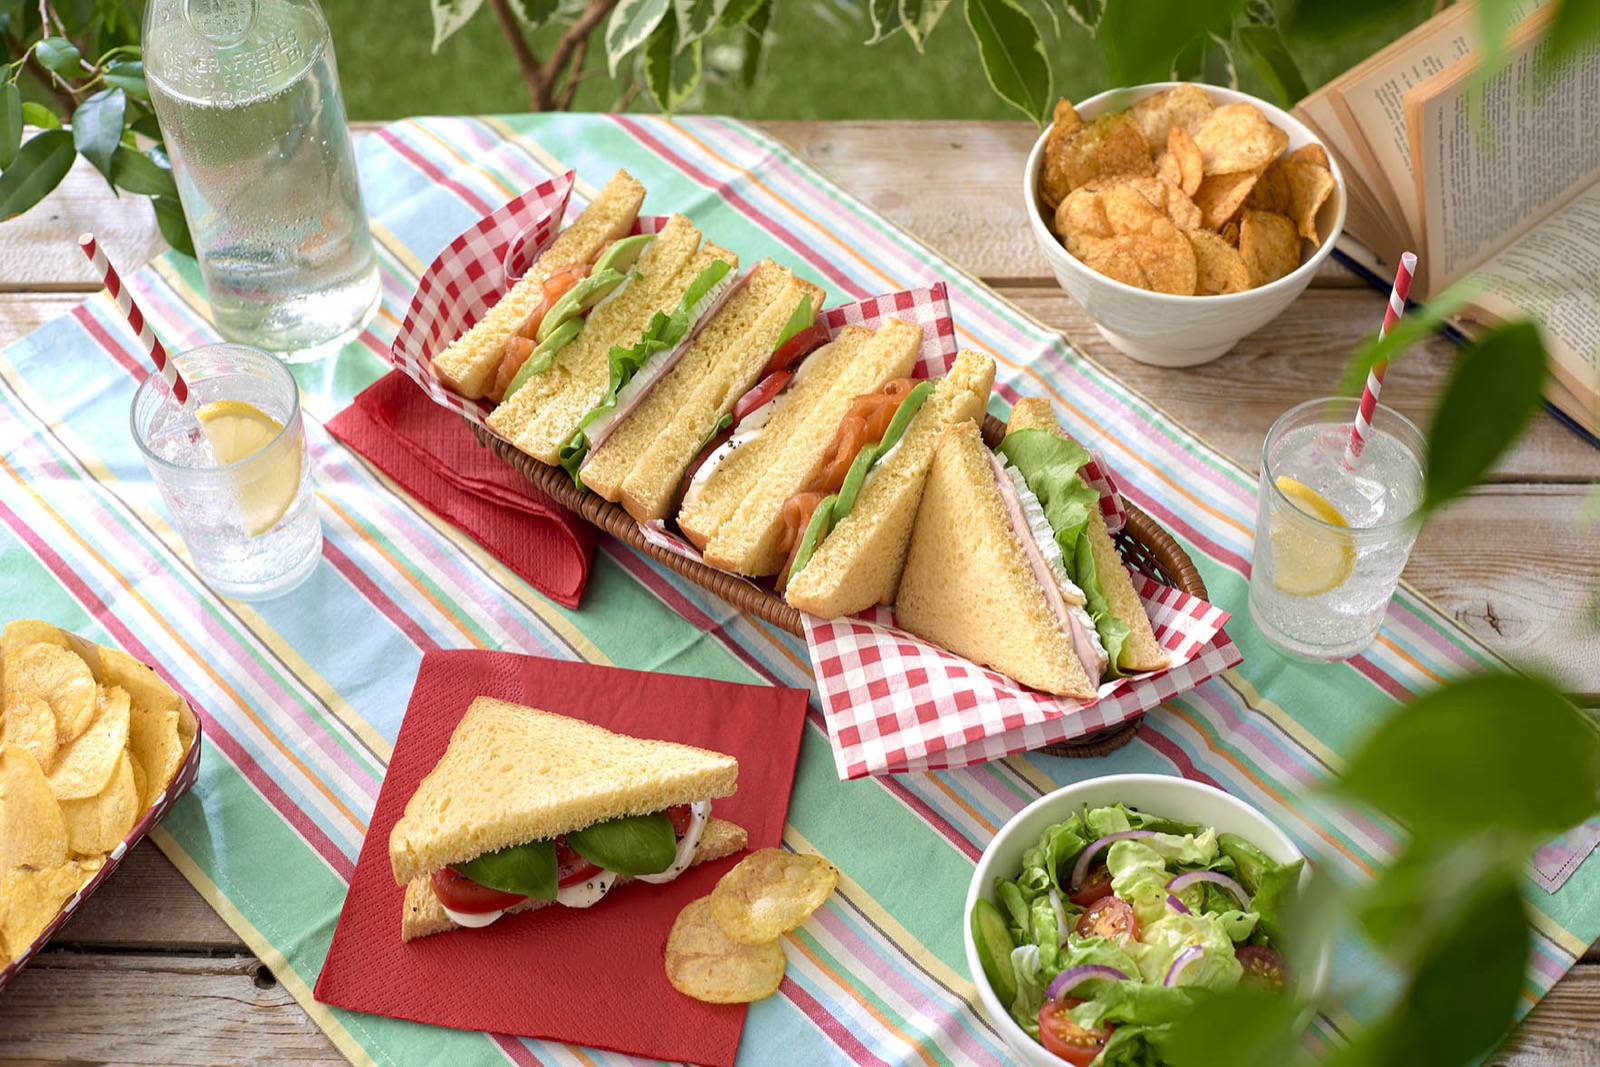 Picnic with sandwiches